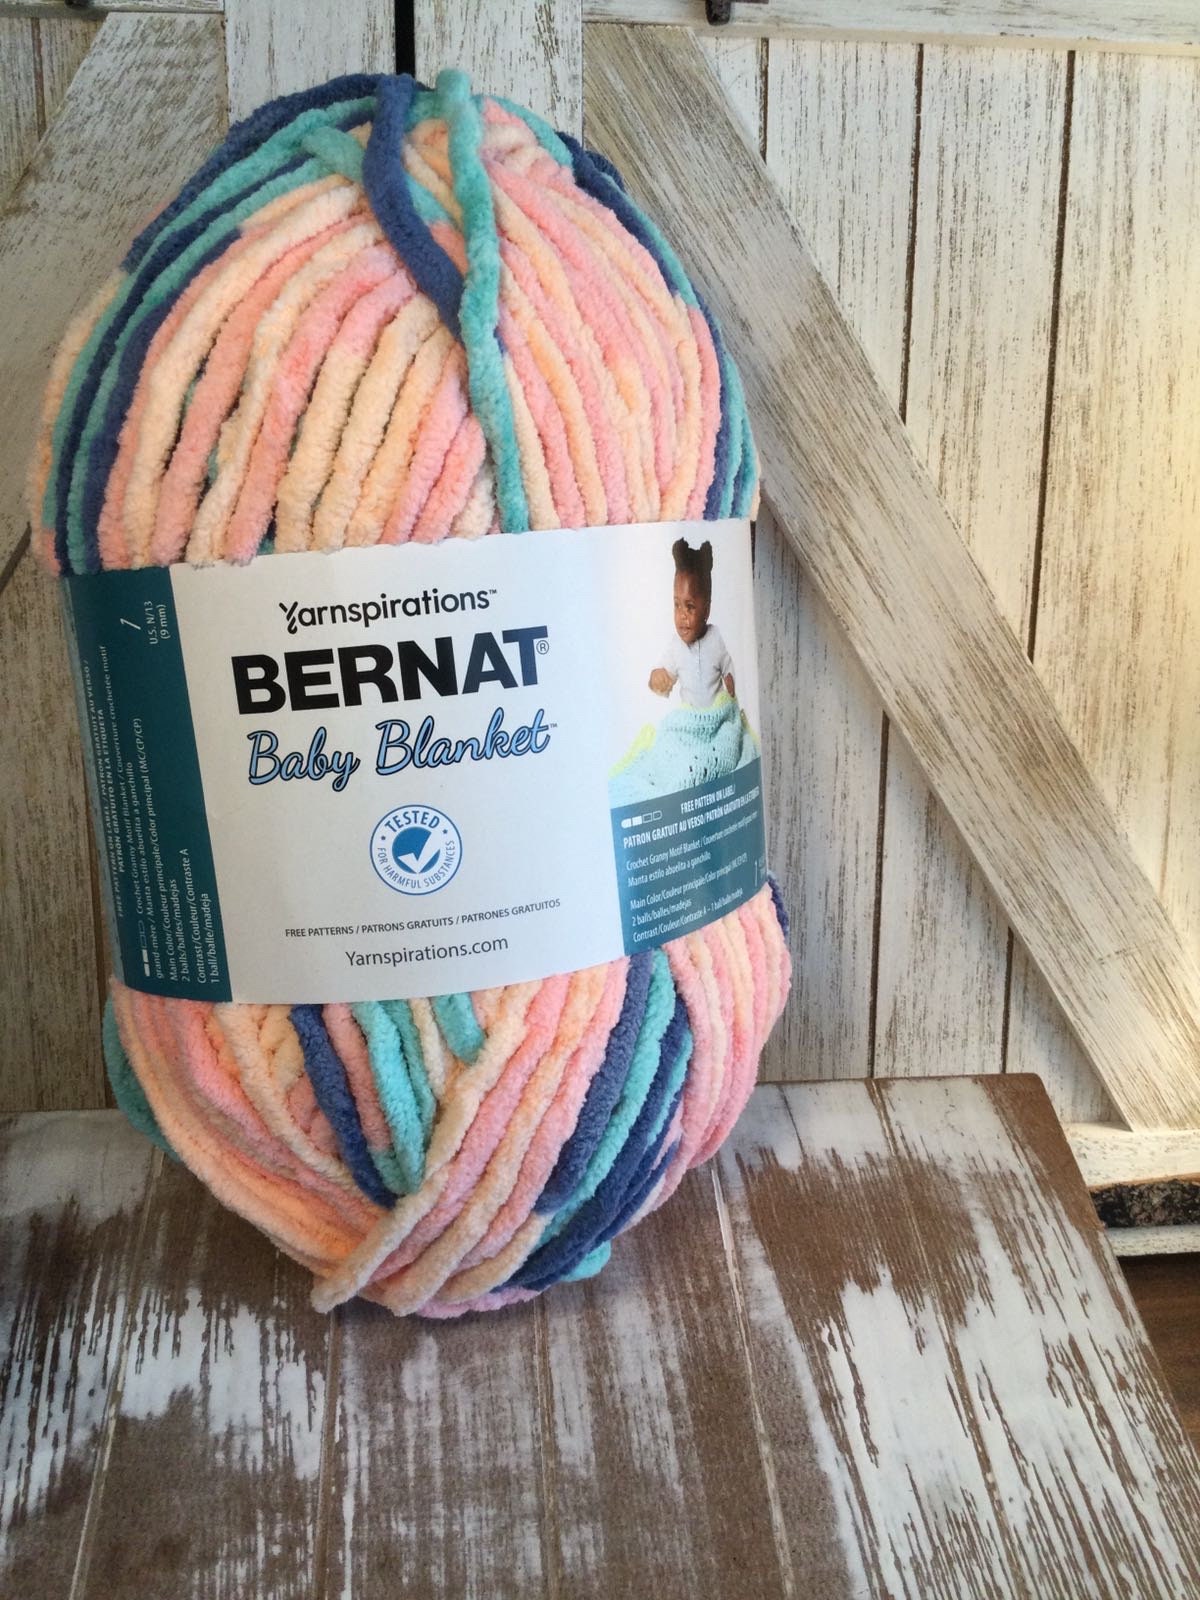 Bernat Blanket Ombre 300g Variety of Colours Ocean Teal Ombre/burgundy  Ombre/eggplant Ombre/greyombre/dusty Rose Ombre 